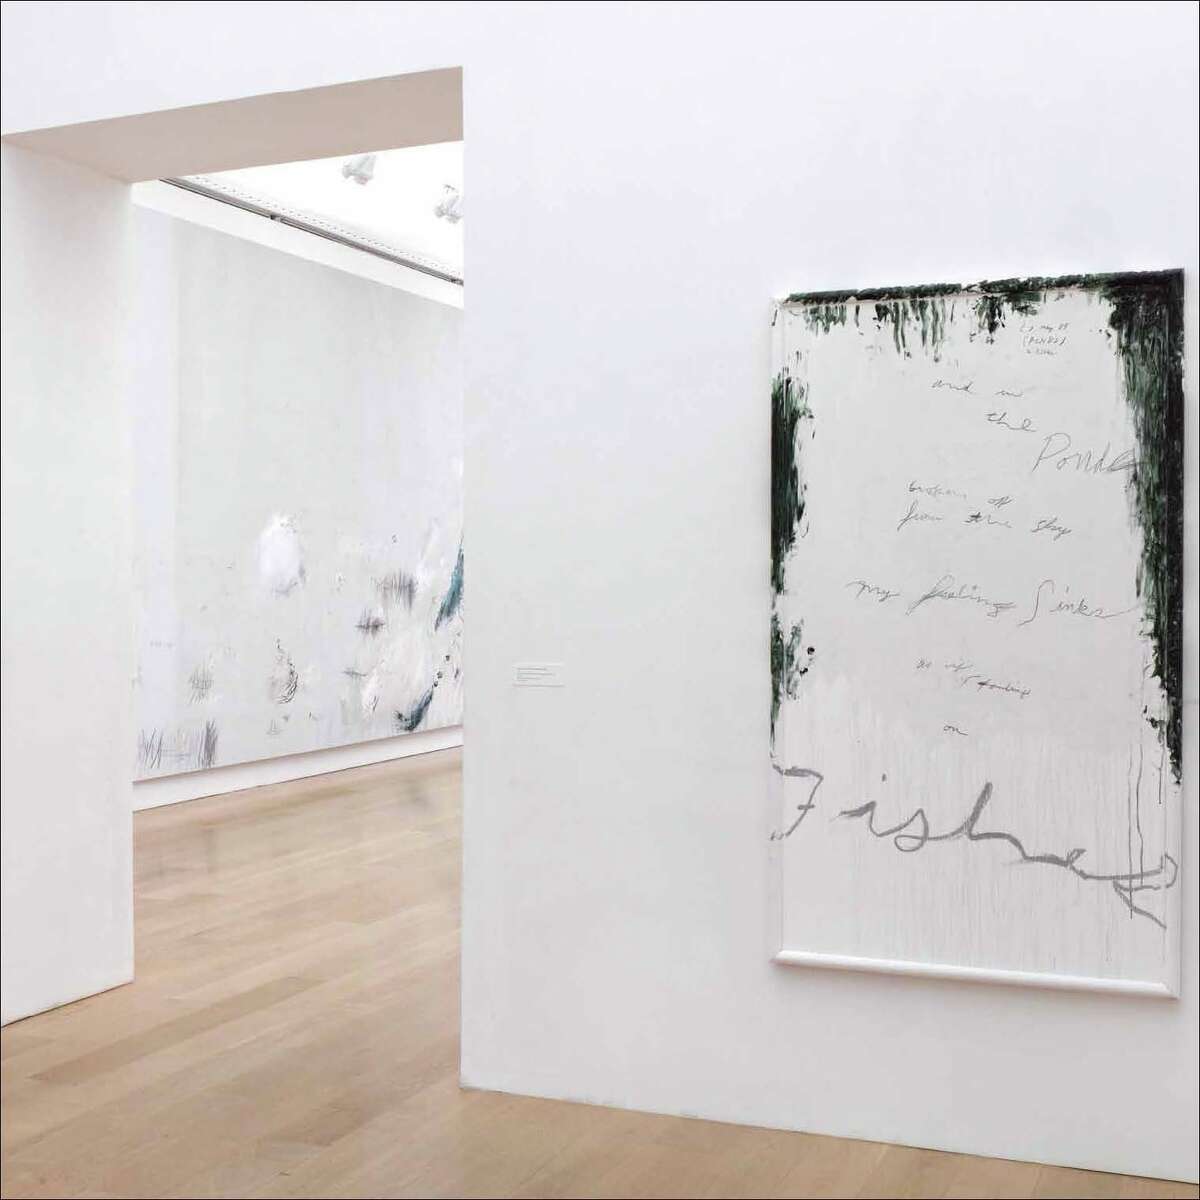 The rooms of the Cy Twombly Gallery flow into each other, bathed in natural light, as seen in the recently published monograph "Cy Twombly Gallery" (Cy Twombly Foundation and the Menil Collection in association with Yale University Press).